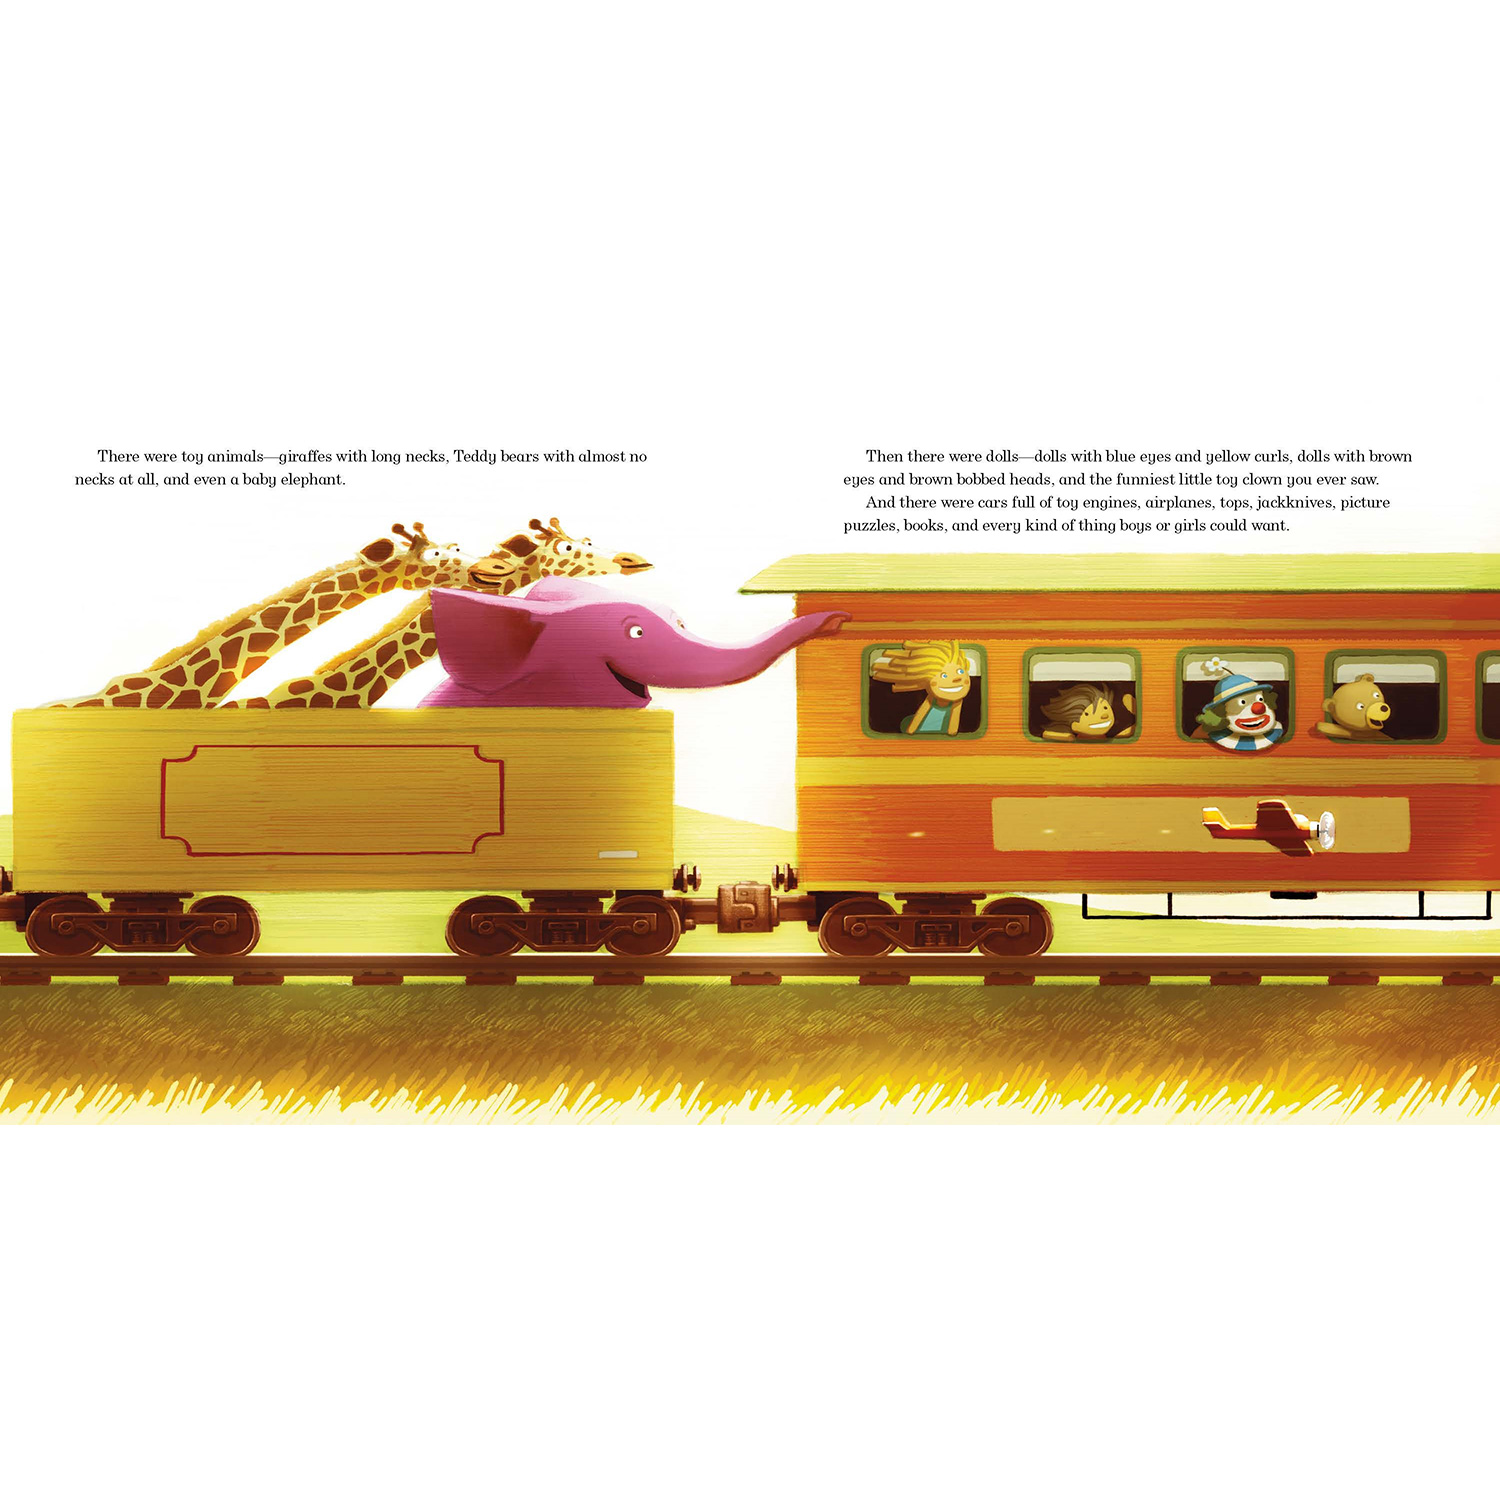 the little engine that could 90th anniversary edition book